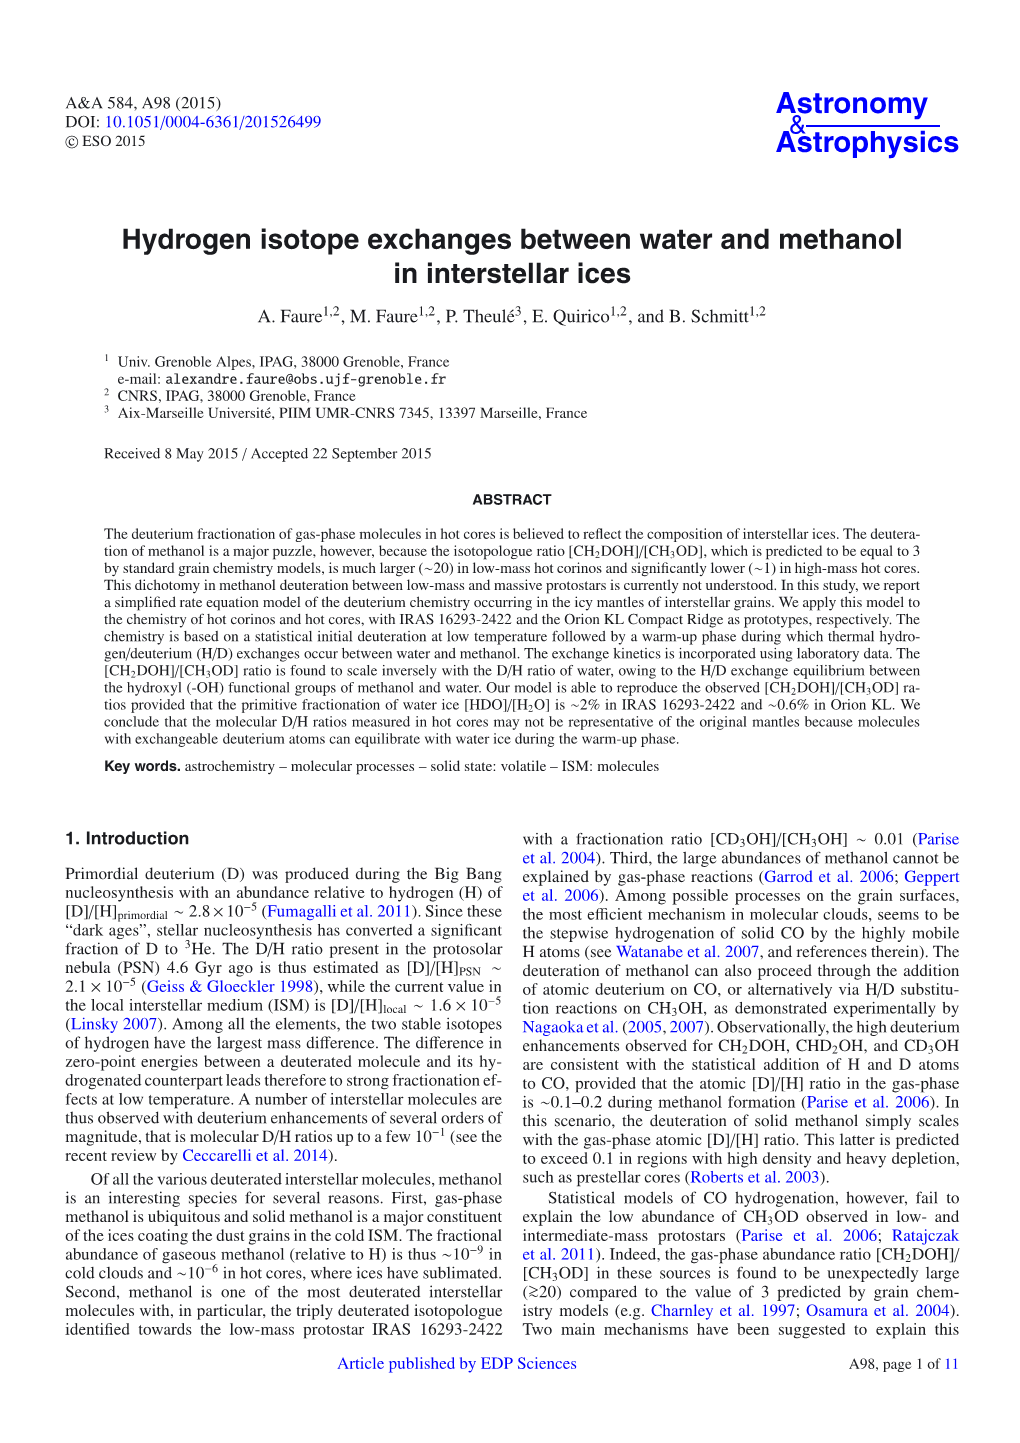 Hydrogen Isotope Exchanges Between Water and Methanol in Interstellar Ices